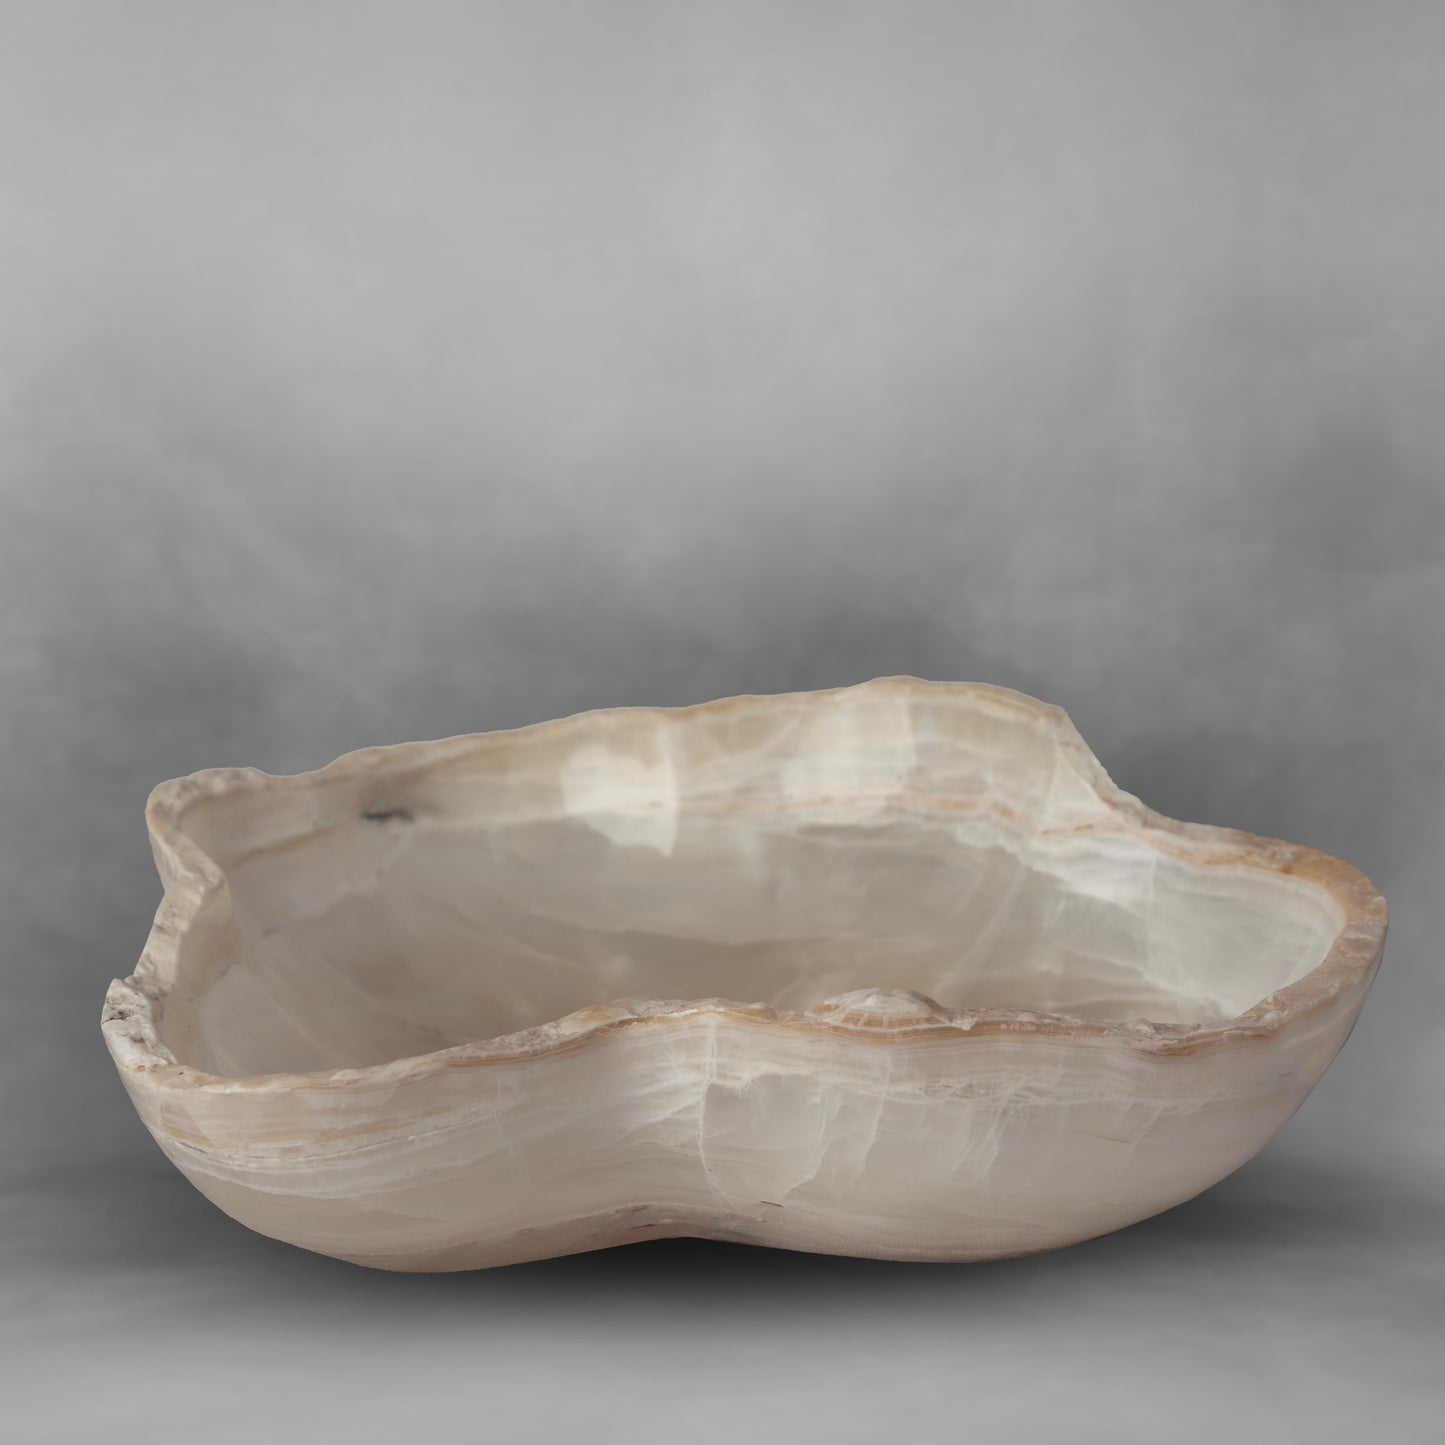 White & Pearl Series 47, white and light brown in an irregular bowl in onyx